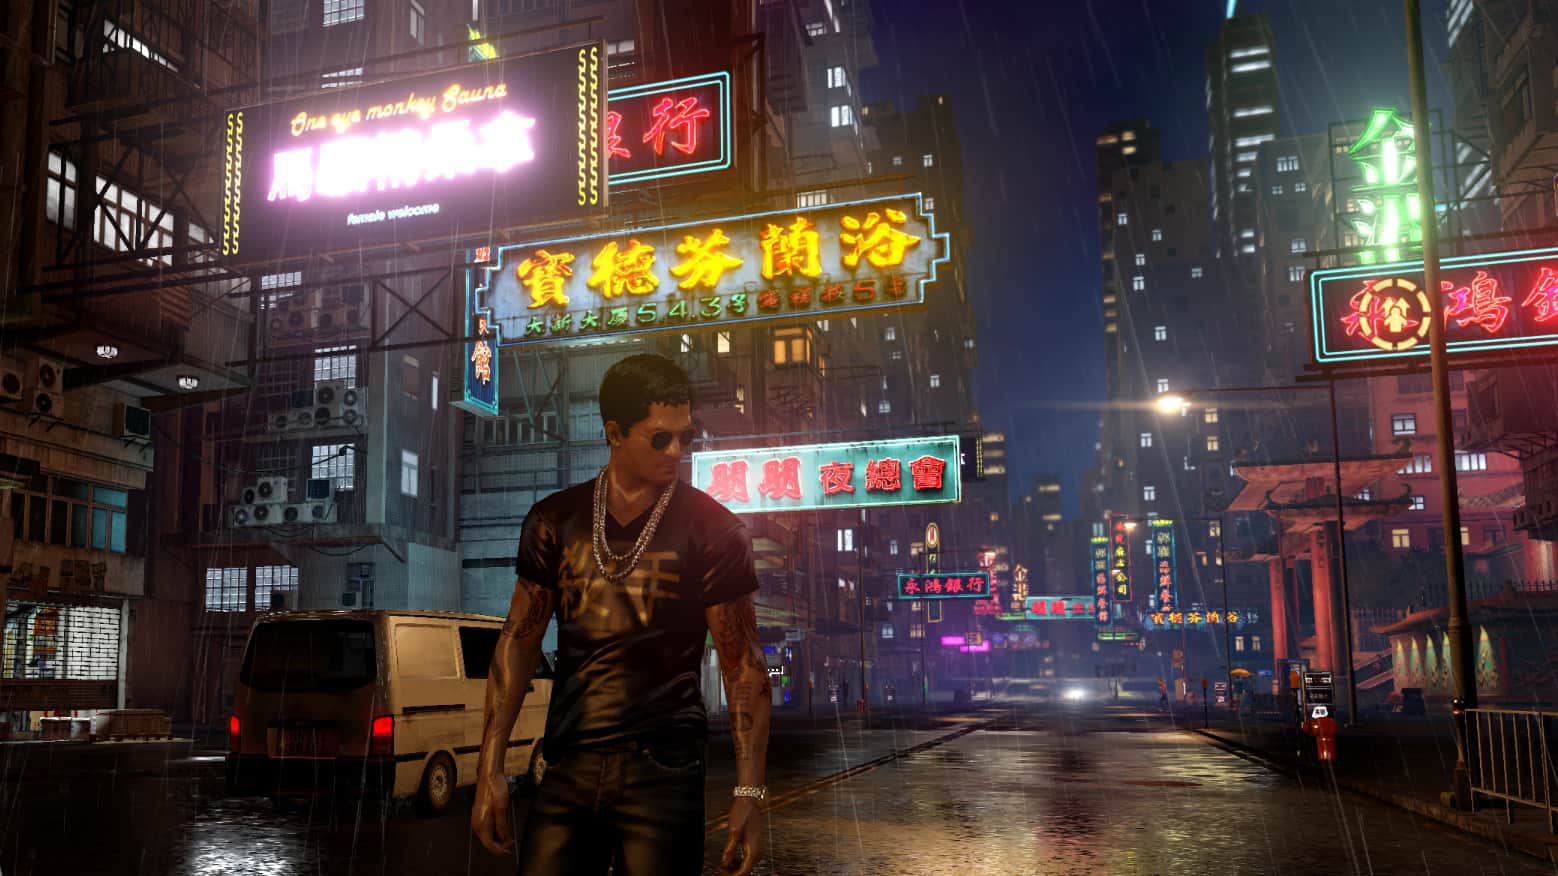 Is sleeping dogs banned in china?